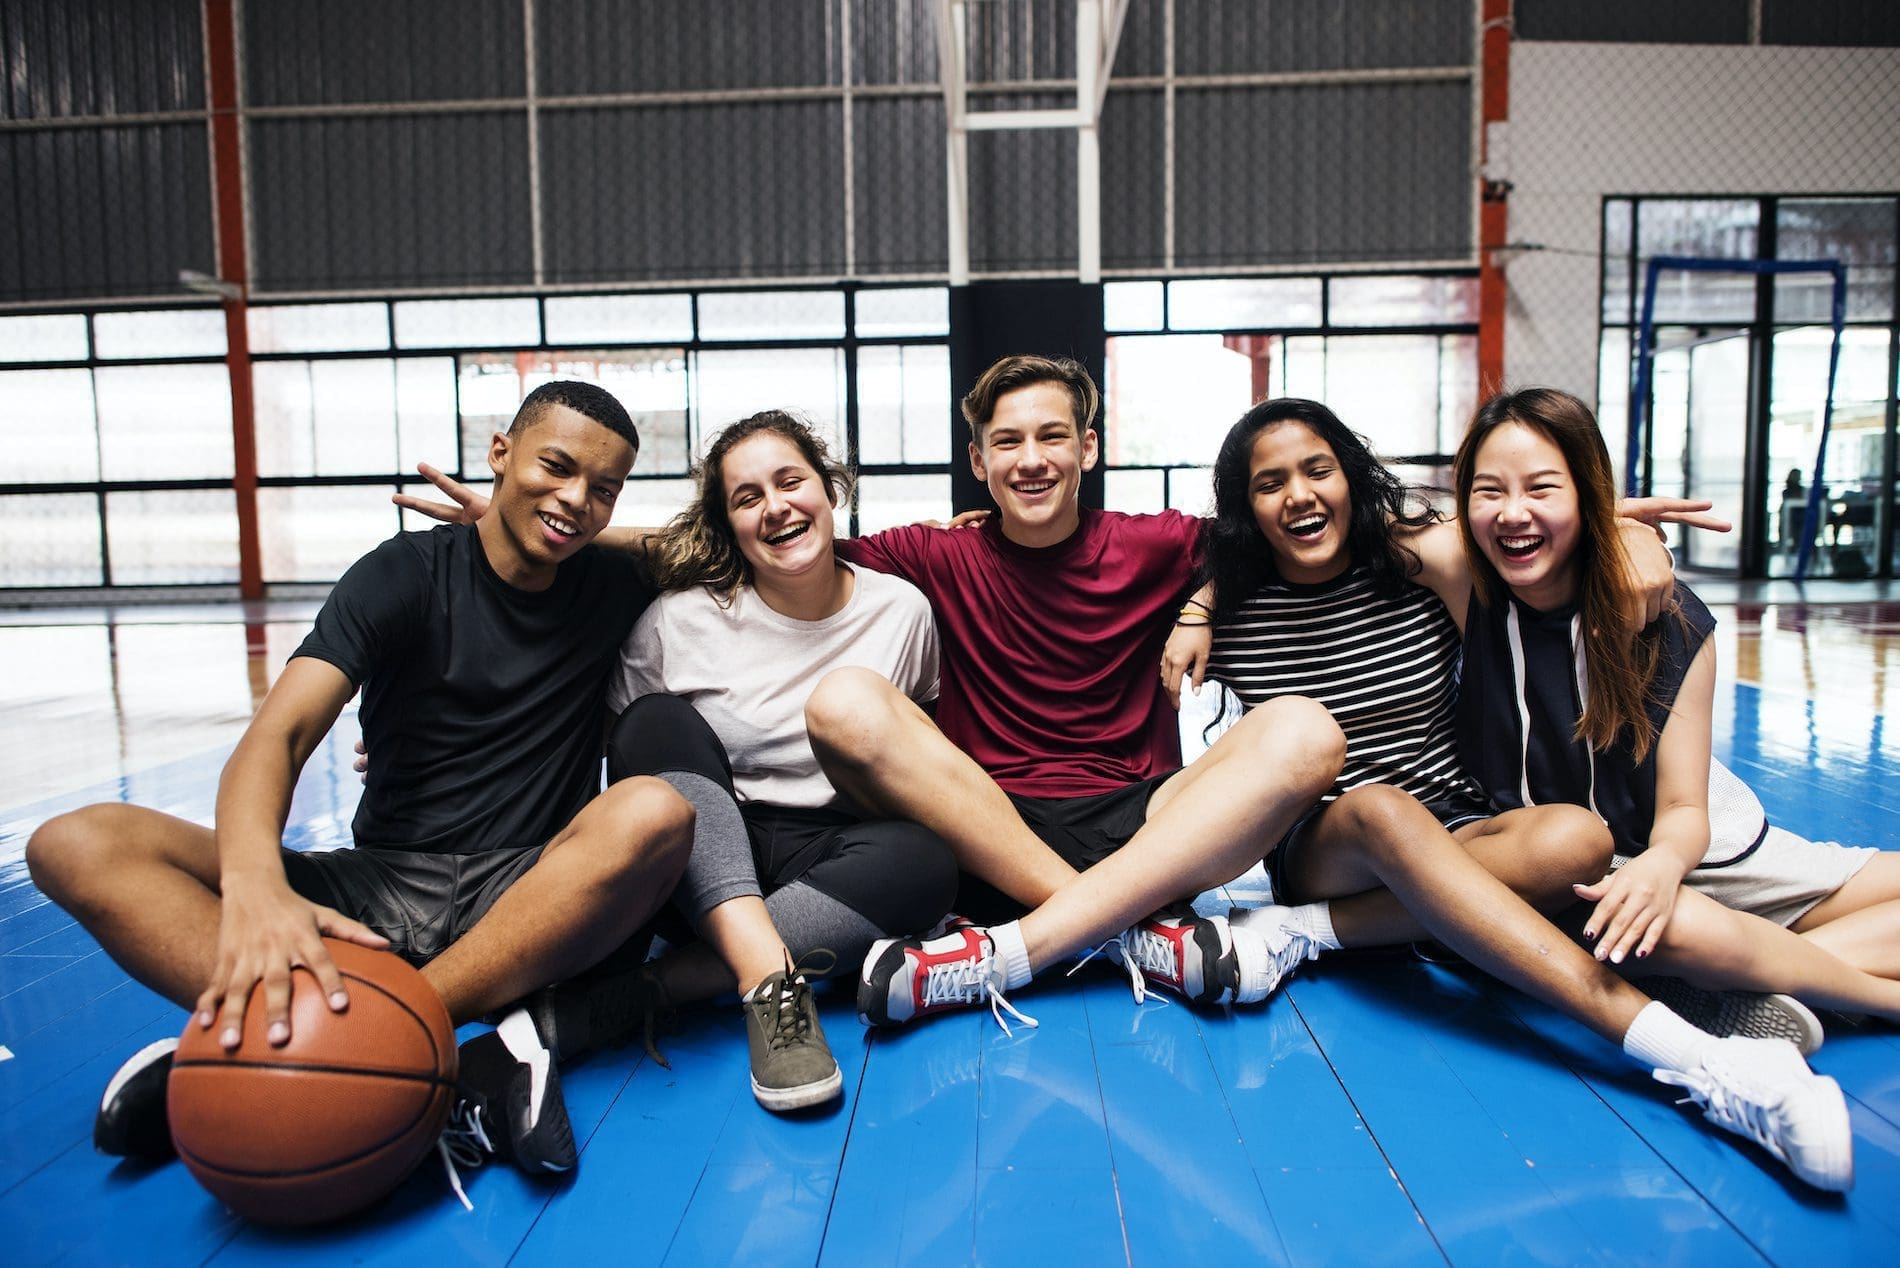 Students sitting and smiling on a gym mat.